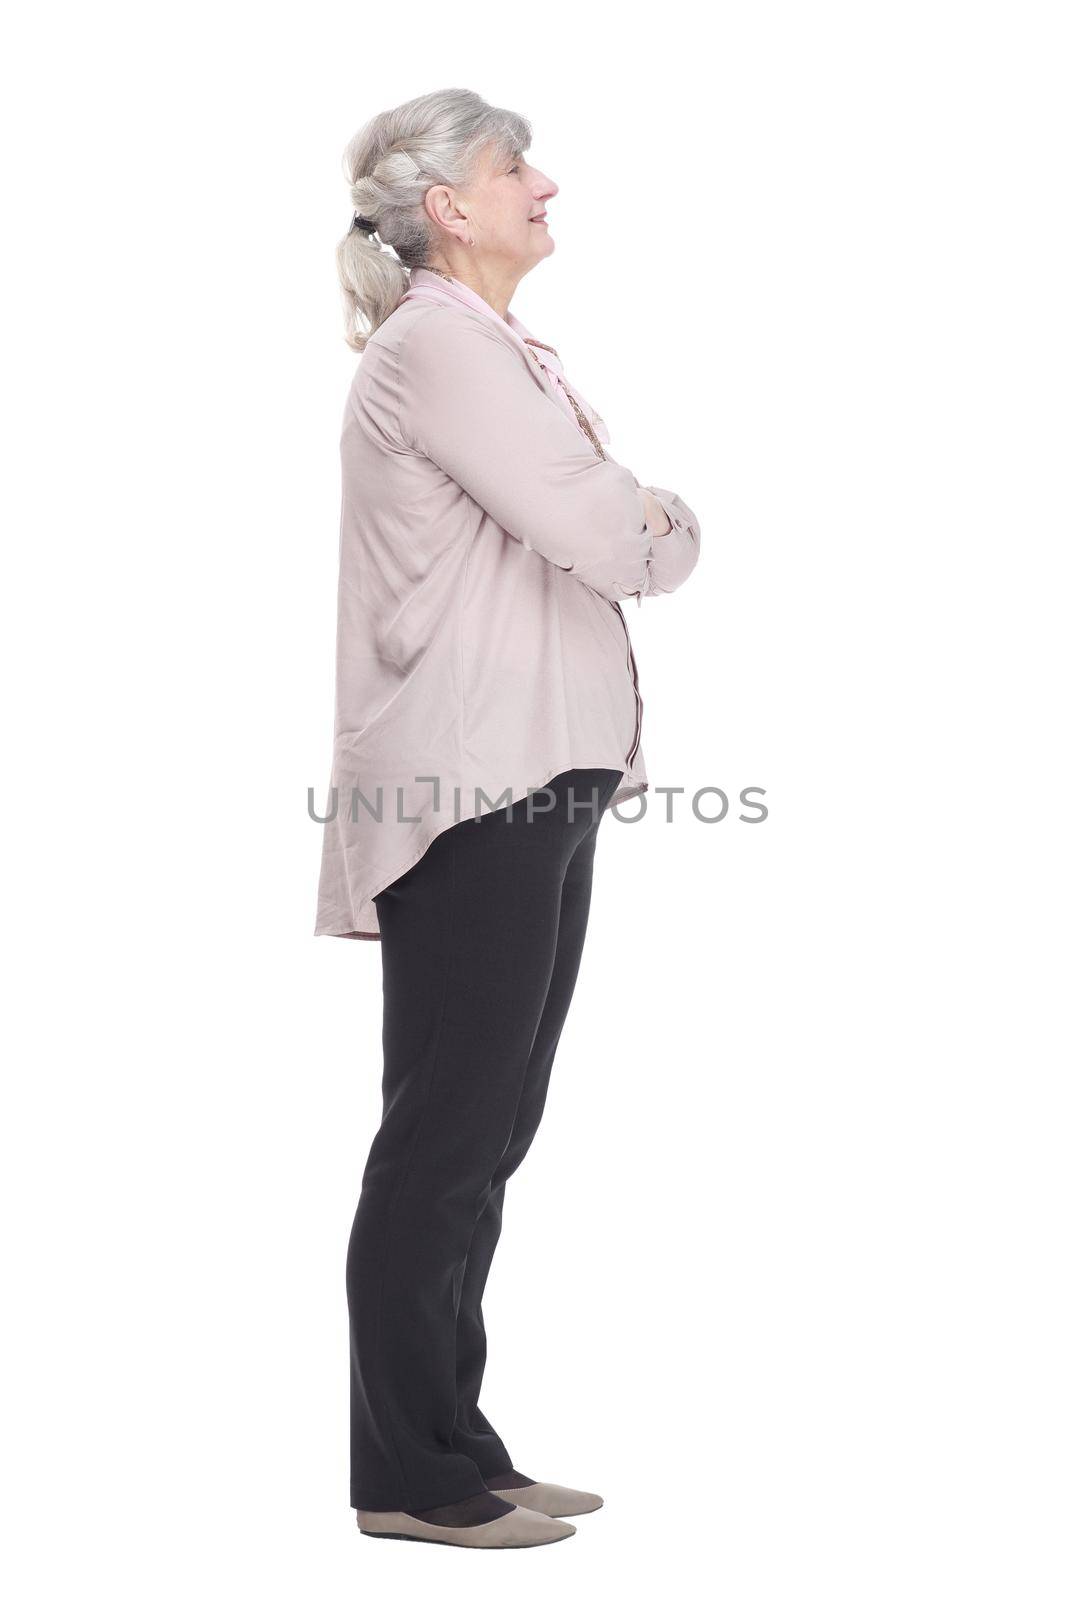 in full growth.smiling old lady pointing at you. isolated on a white background.